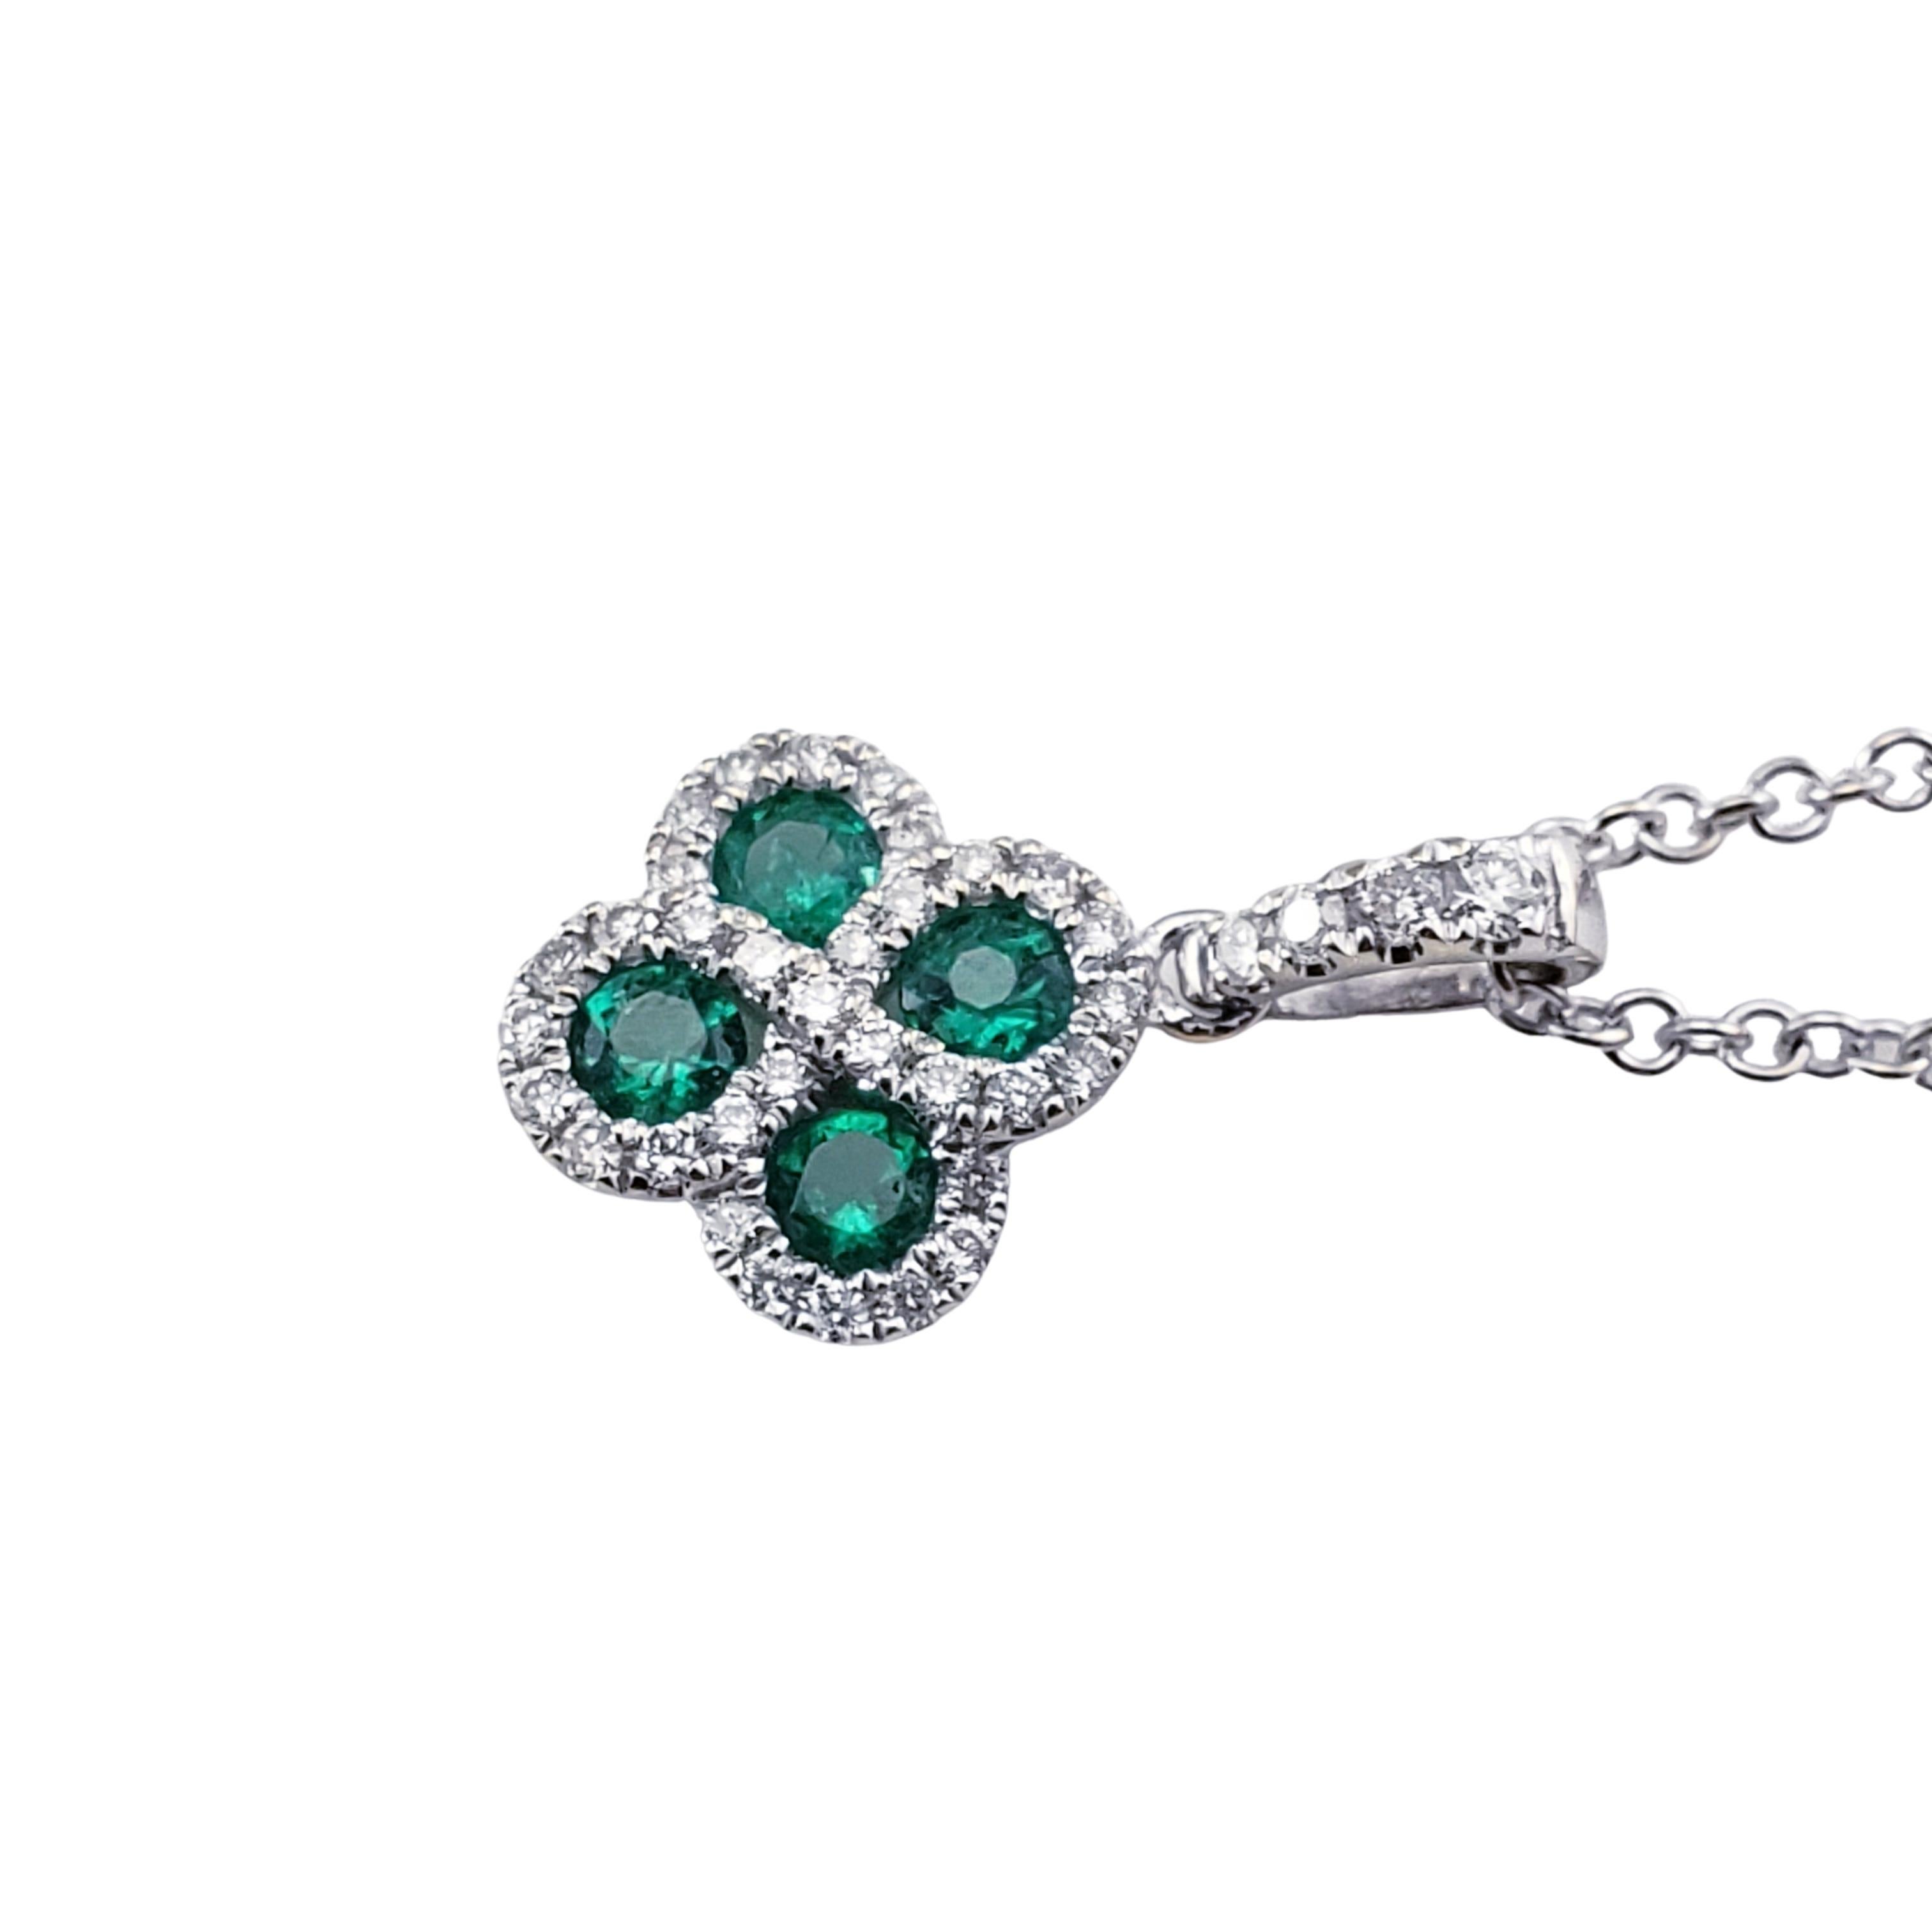 14 Karat White Gold Lab Created Emerald and Diamond Pendant Necklace-

This lovely pendant features four round emeralds and 33 round brilliant cut diamonds set in  14K white gold.  Suspends from a classic white gold cable chain.

Approximate diamond